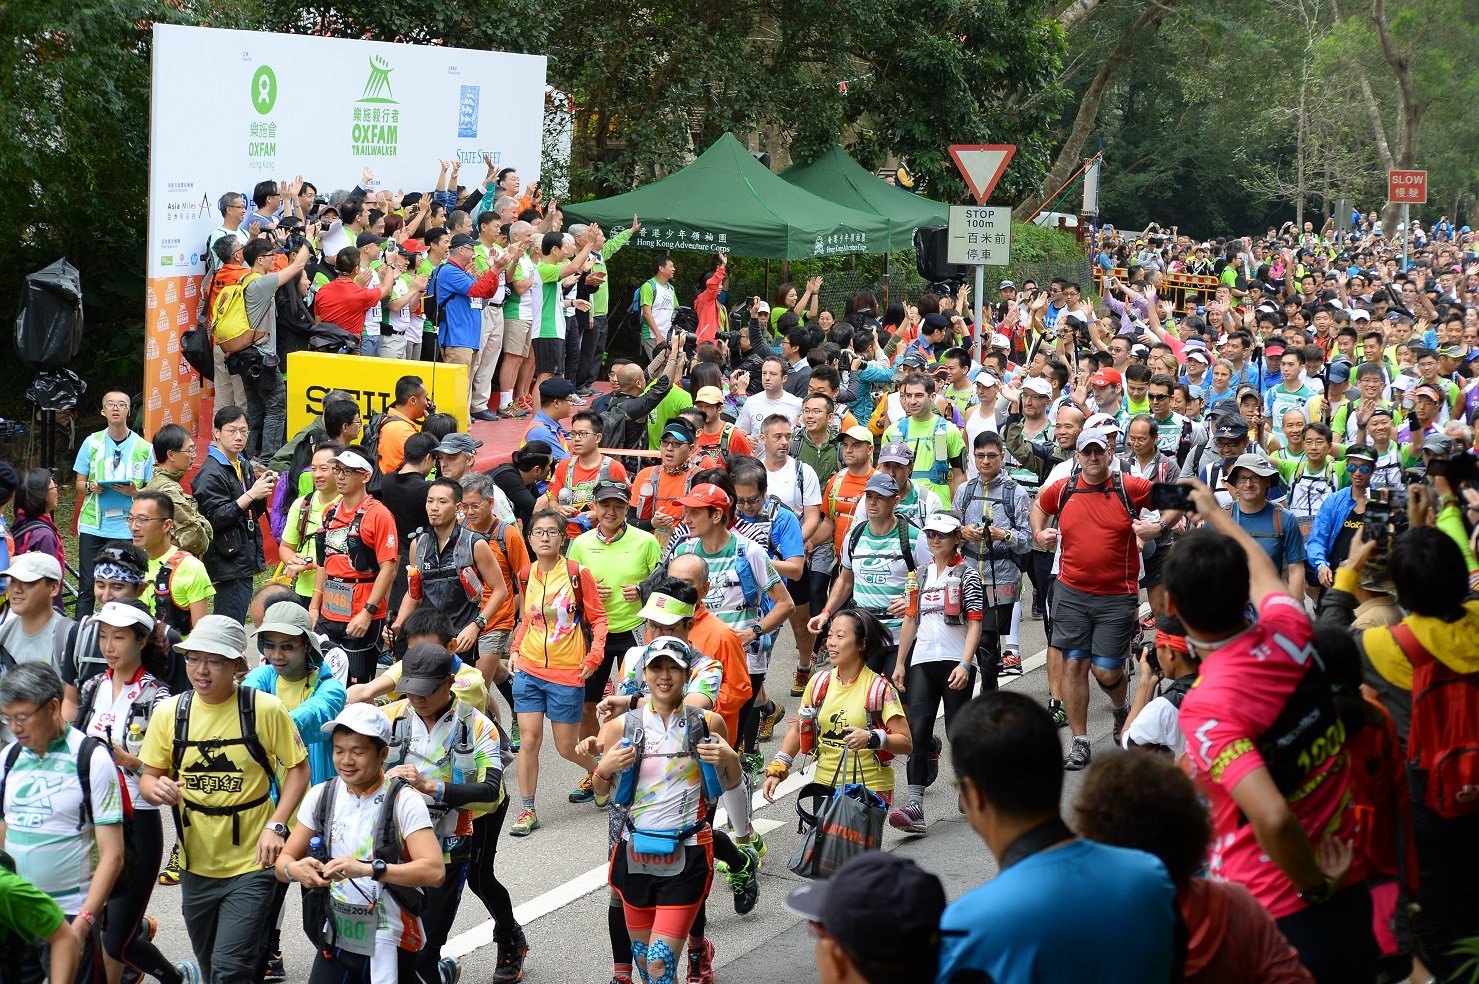 5,200 walkers are undertaking the 100 km challenge and will trek along the MacLehose Trail and other trails in teams of four within 48 hours.